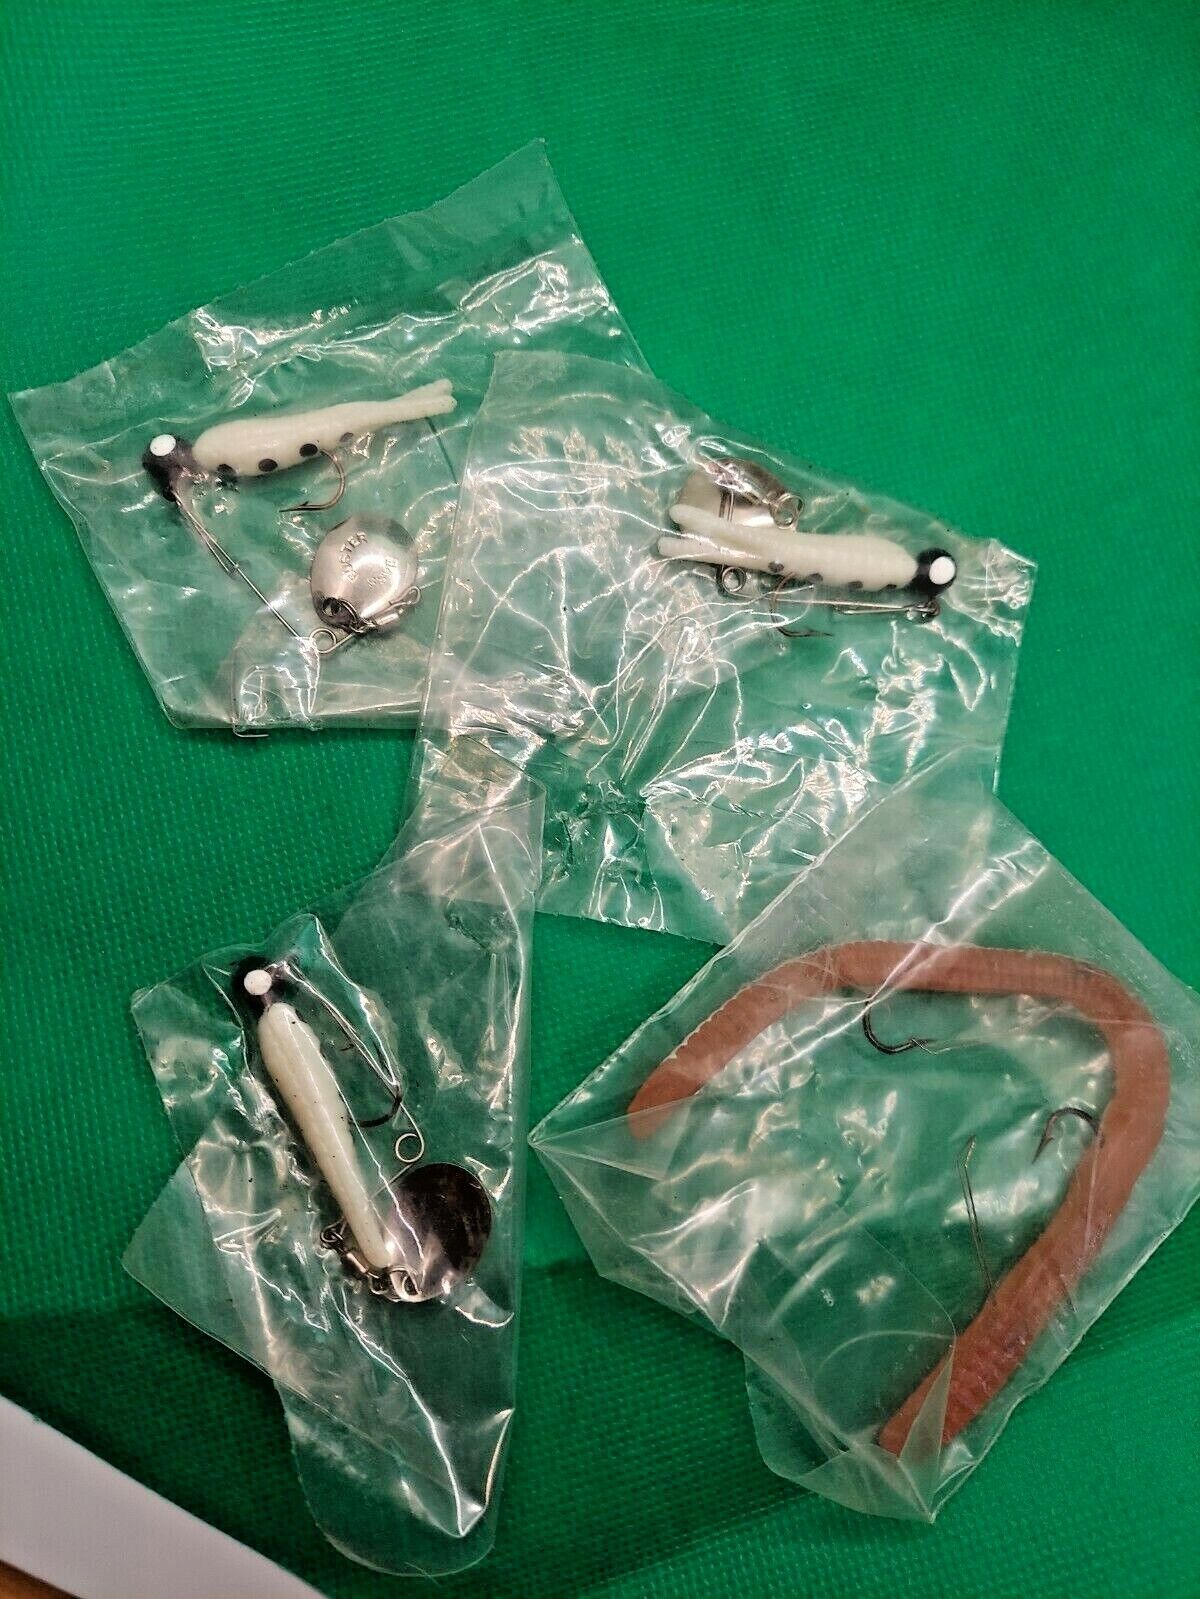 Old lures we have a mixed lot of rubber lures for Bass or panfish